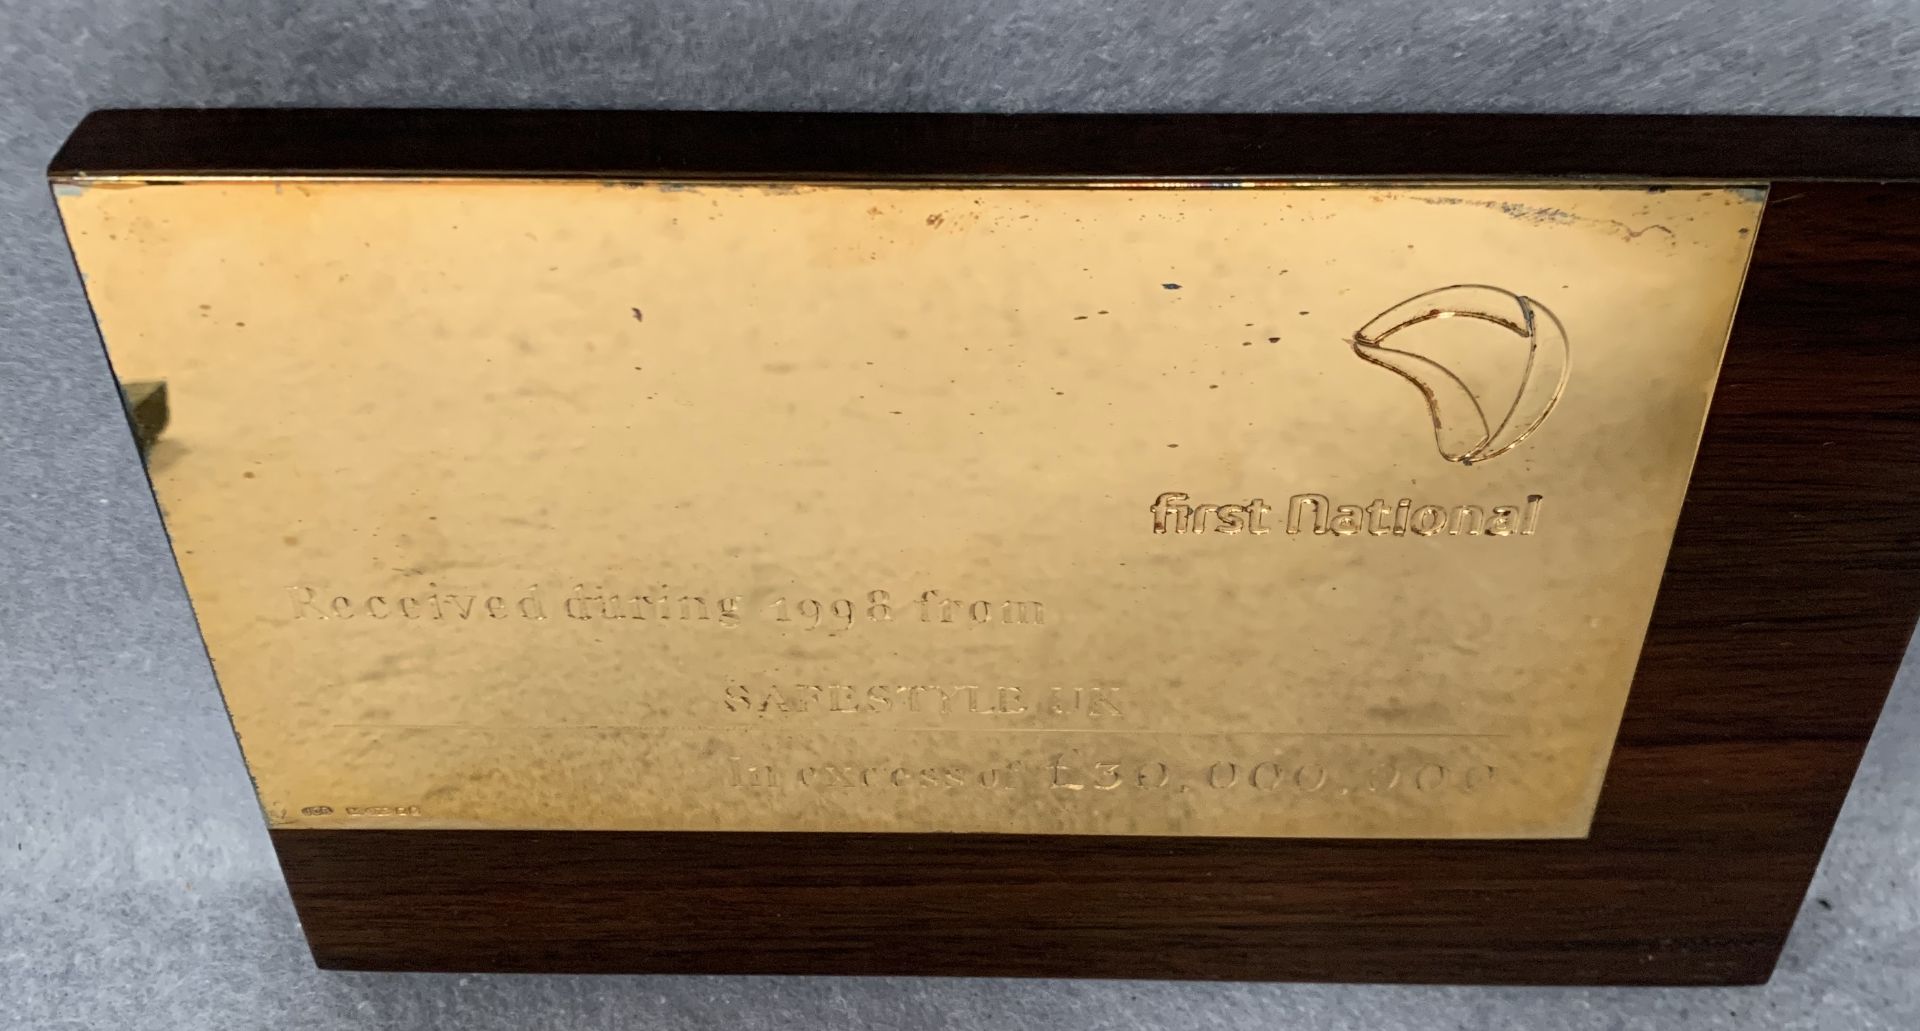 A silver presentation plaque from The First National Bank mounted on a walnut finish frame complete - Image 2 of 4